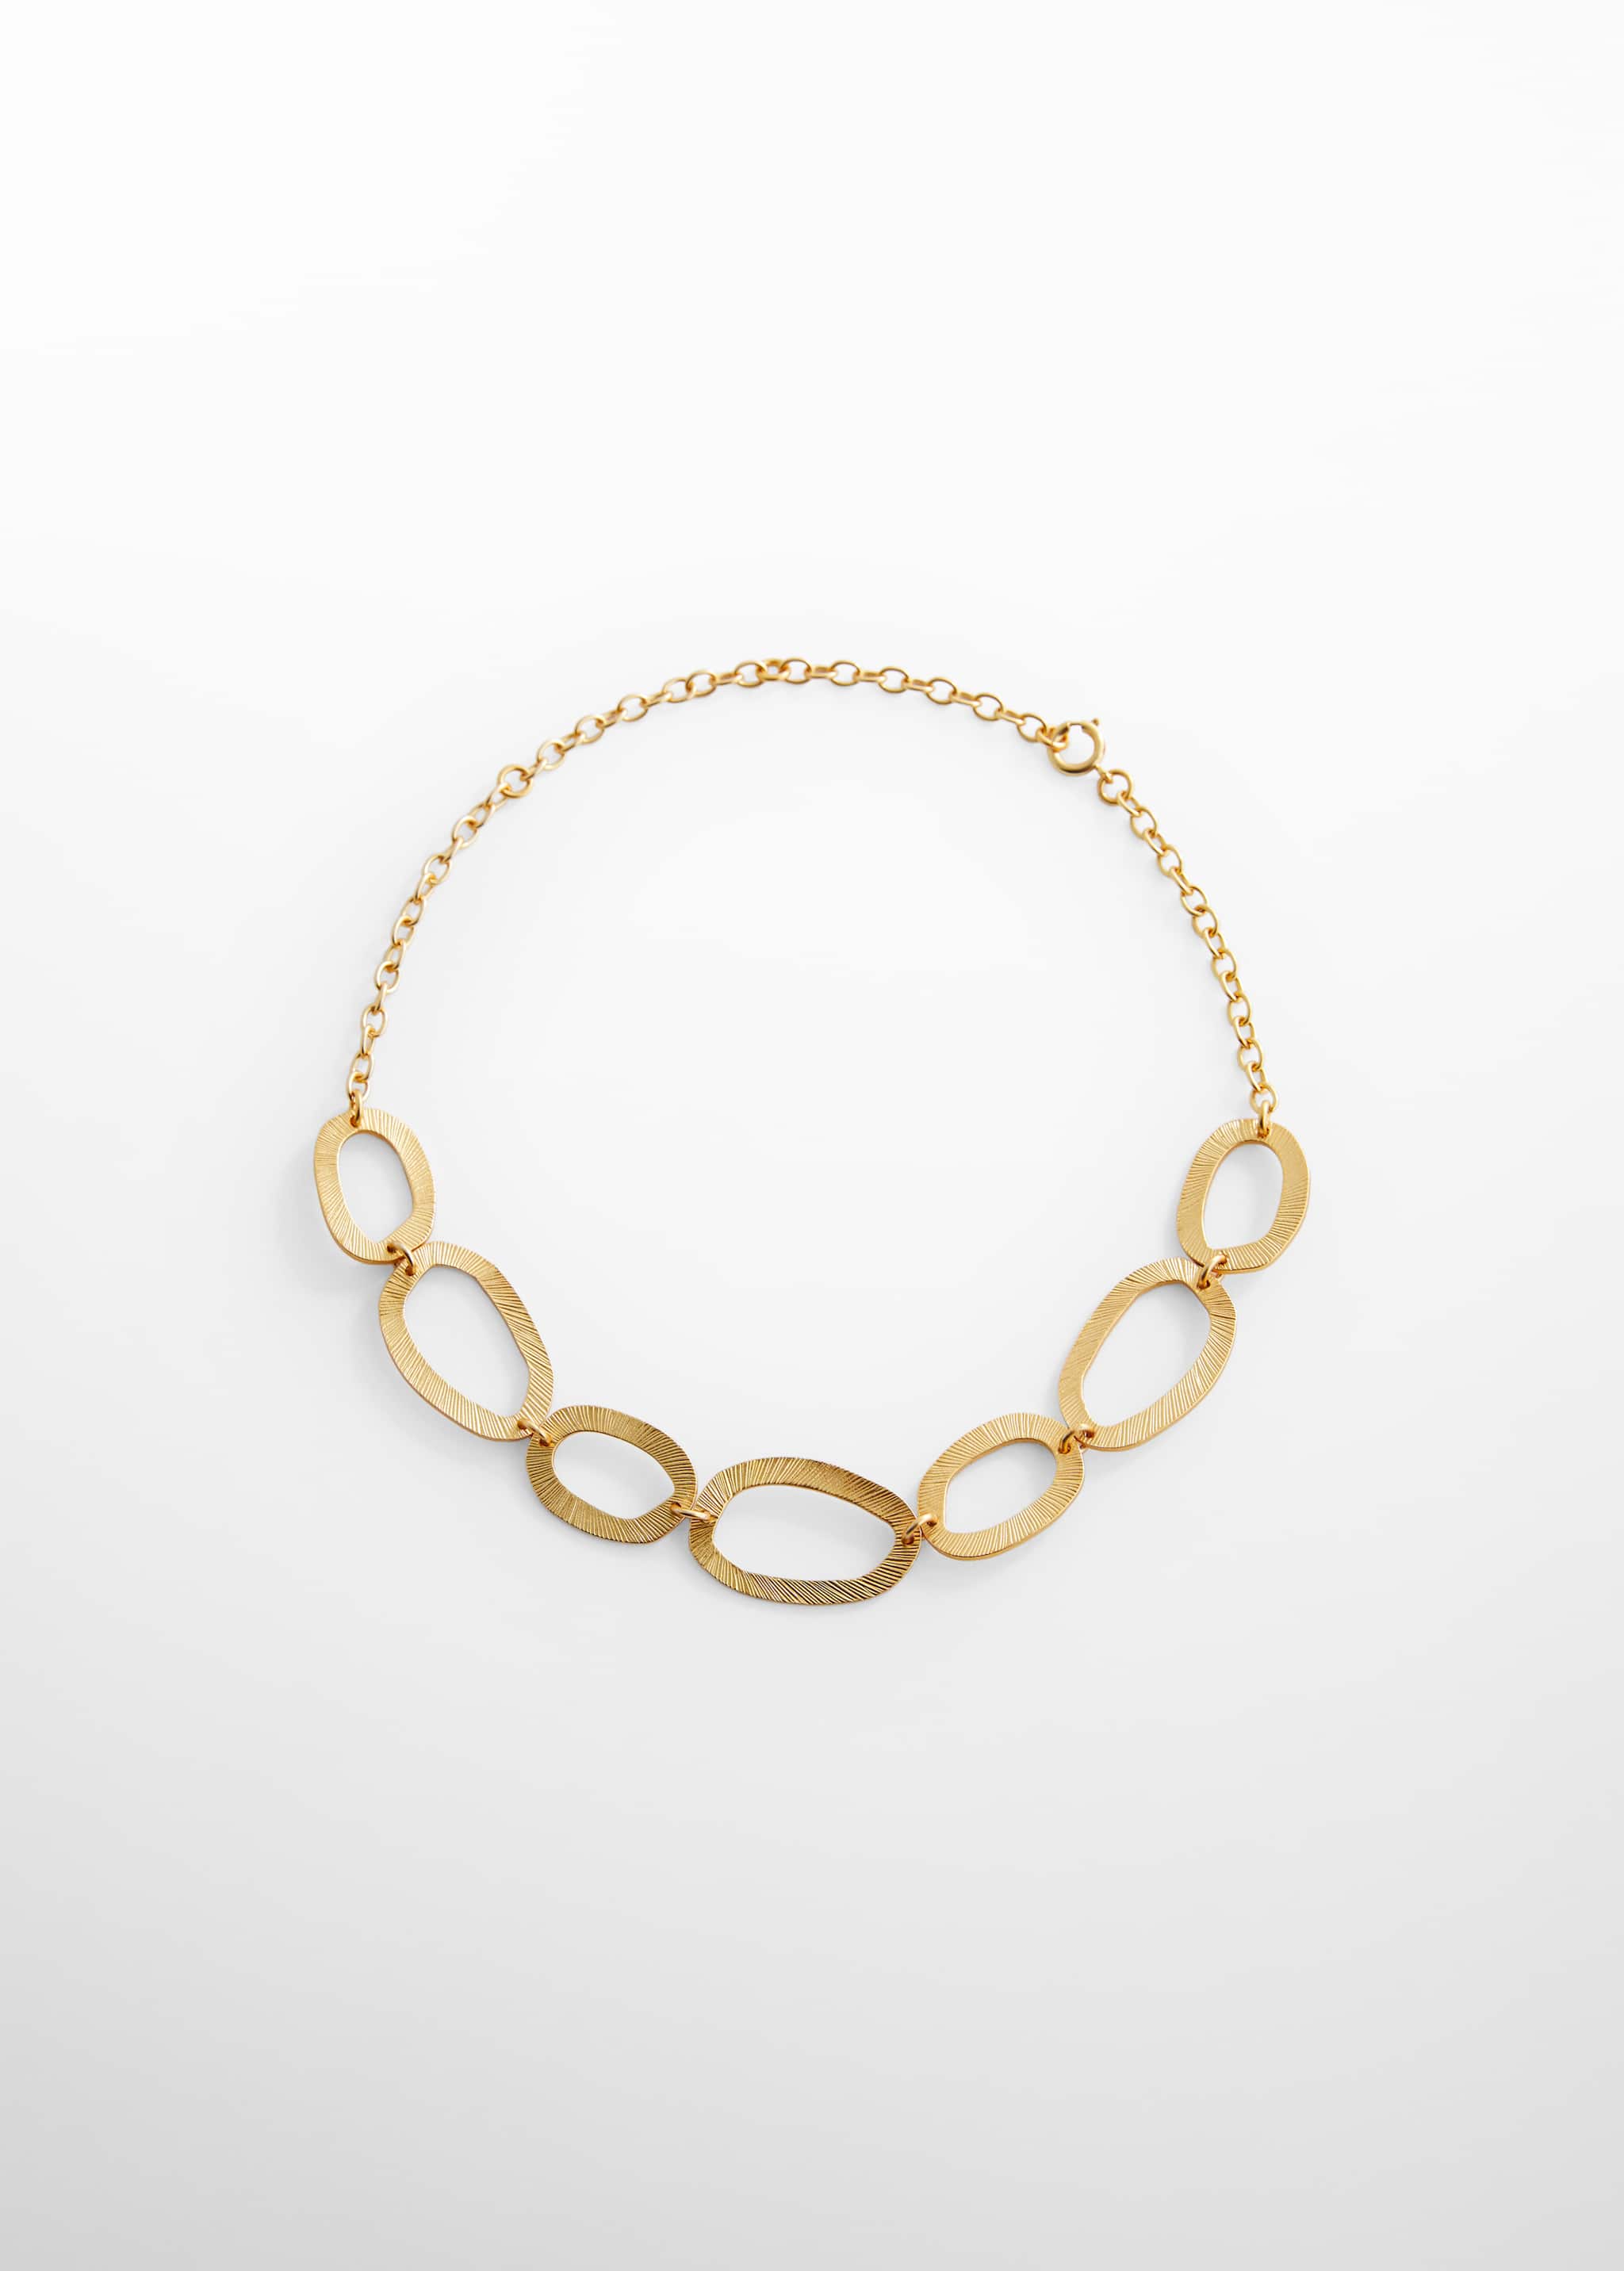 Irregular hoops necklace - Article without model